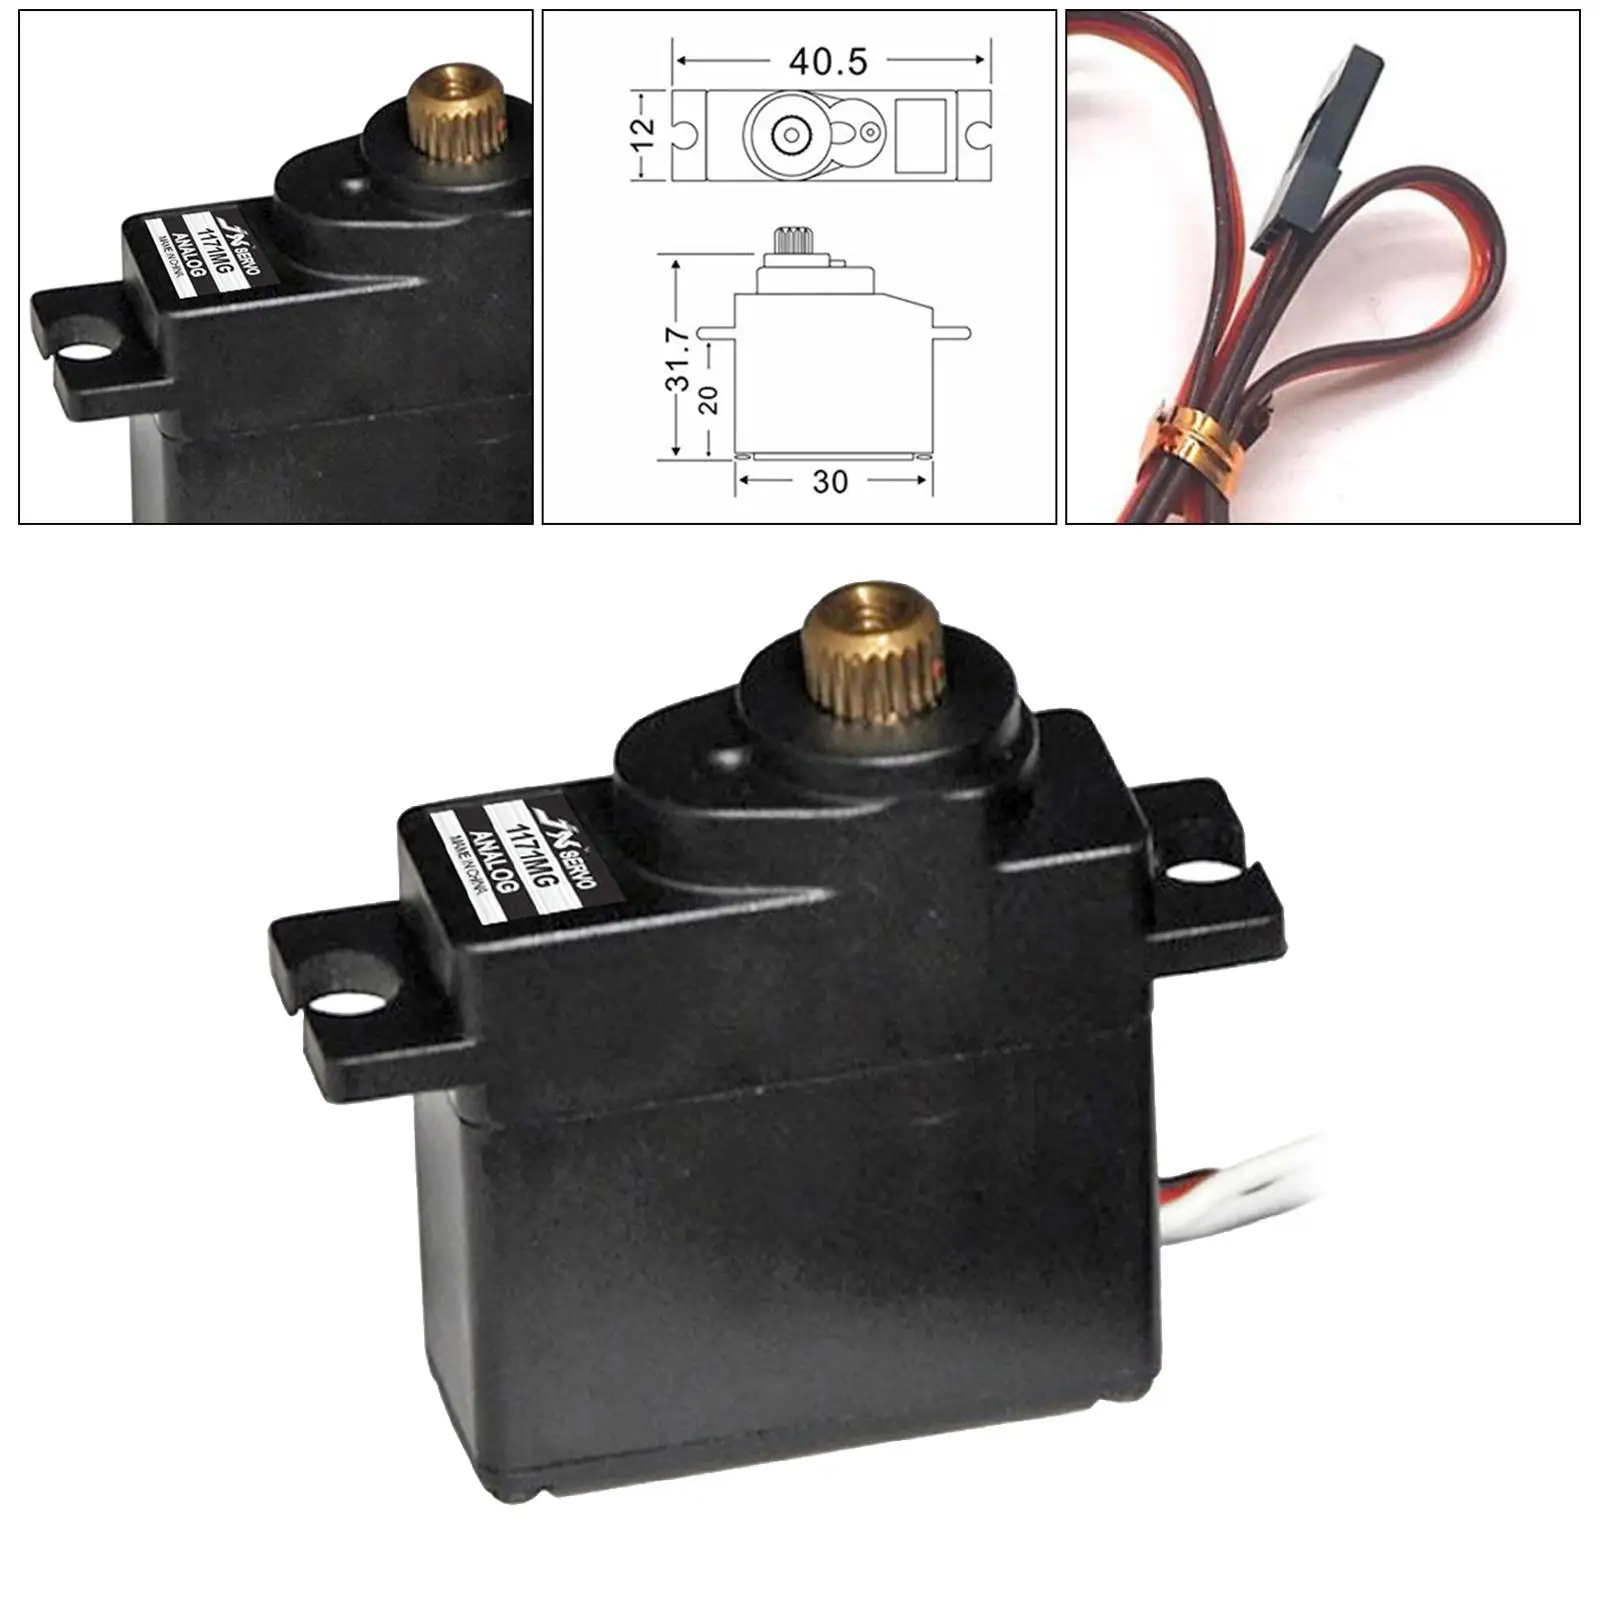 Upgraded PS-1171MG Mini Metal Gear Analog Servo 3.5Kg for RC Car Helicopter